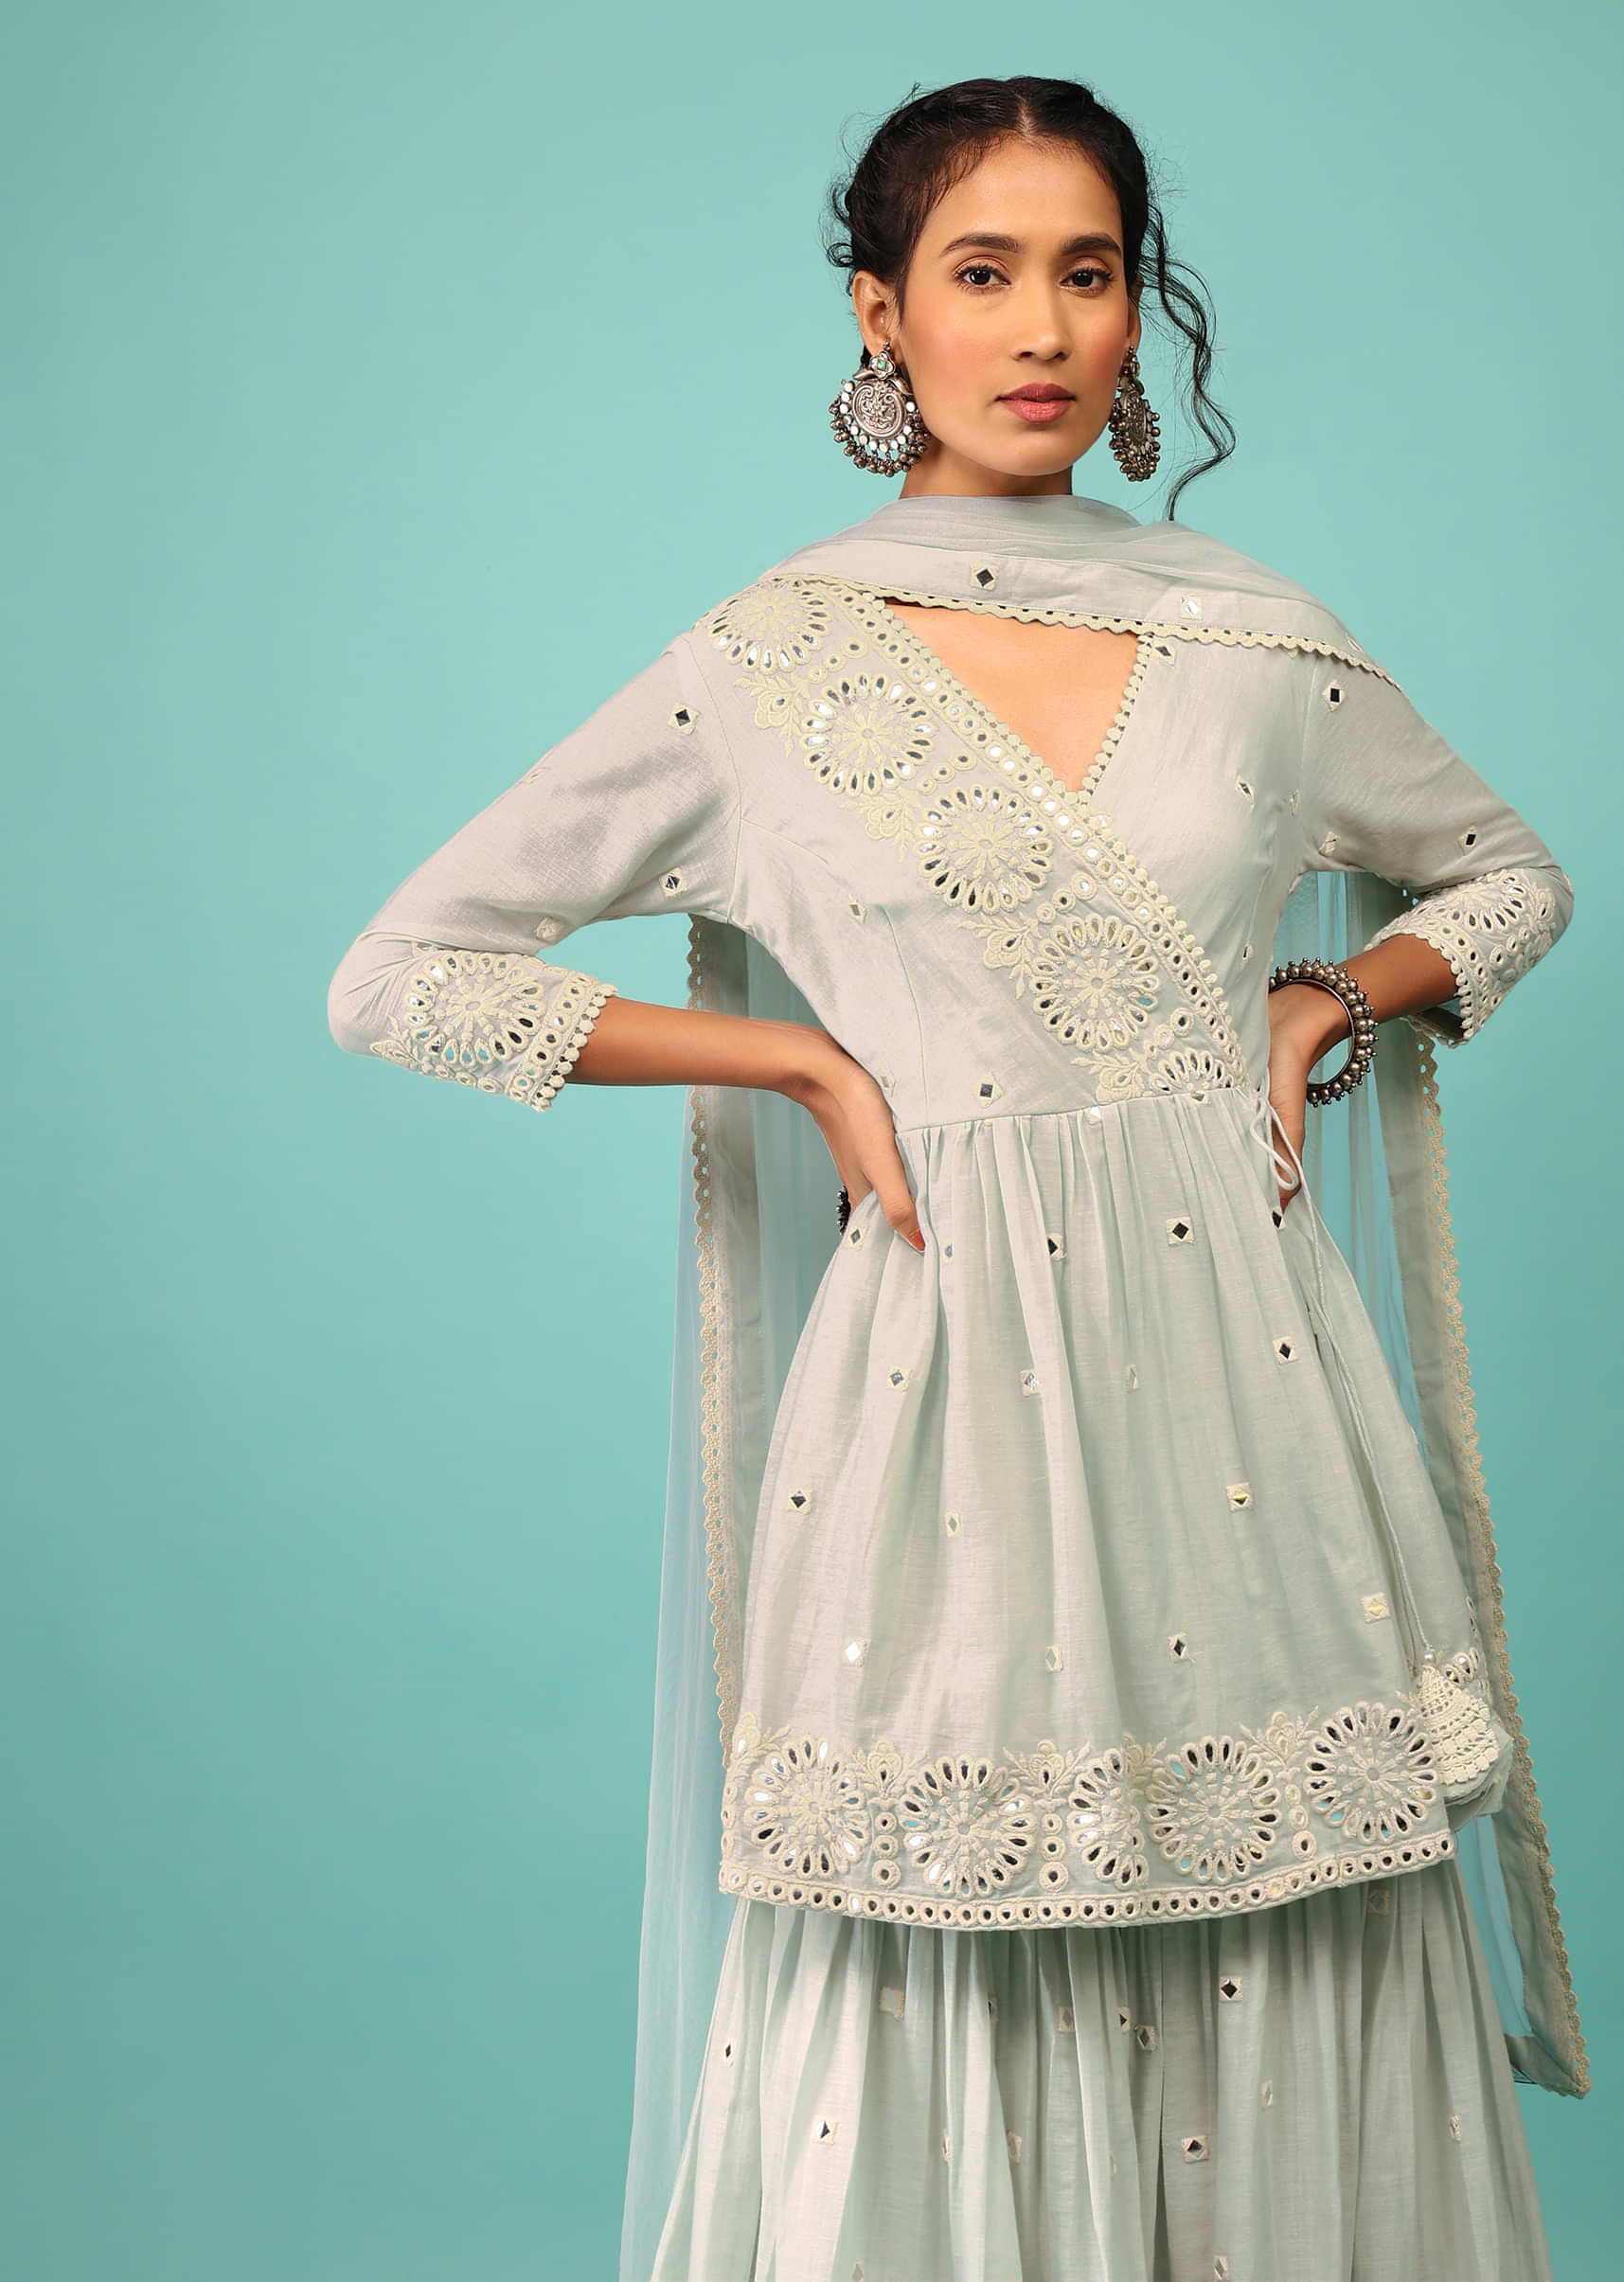 Powder Mist Blue Sharara Suit In Cotton With Lucknowi Floral Embroidery & Angarakha Peplum Top